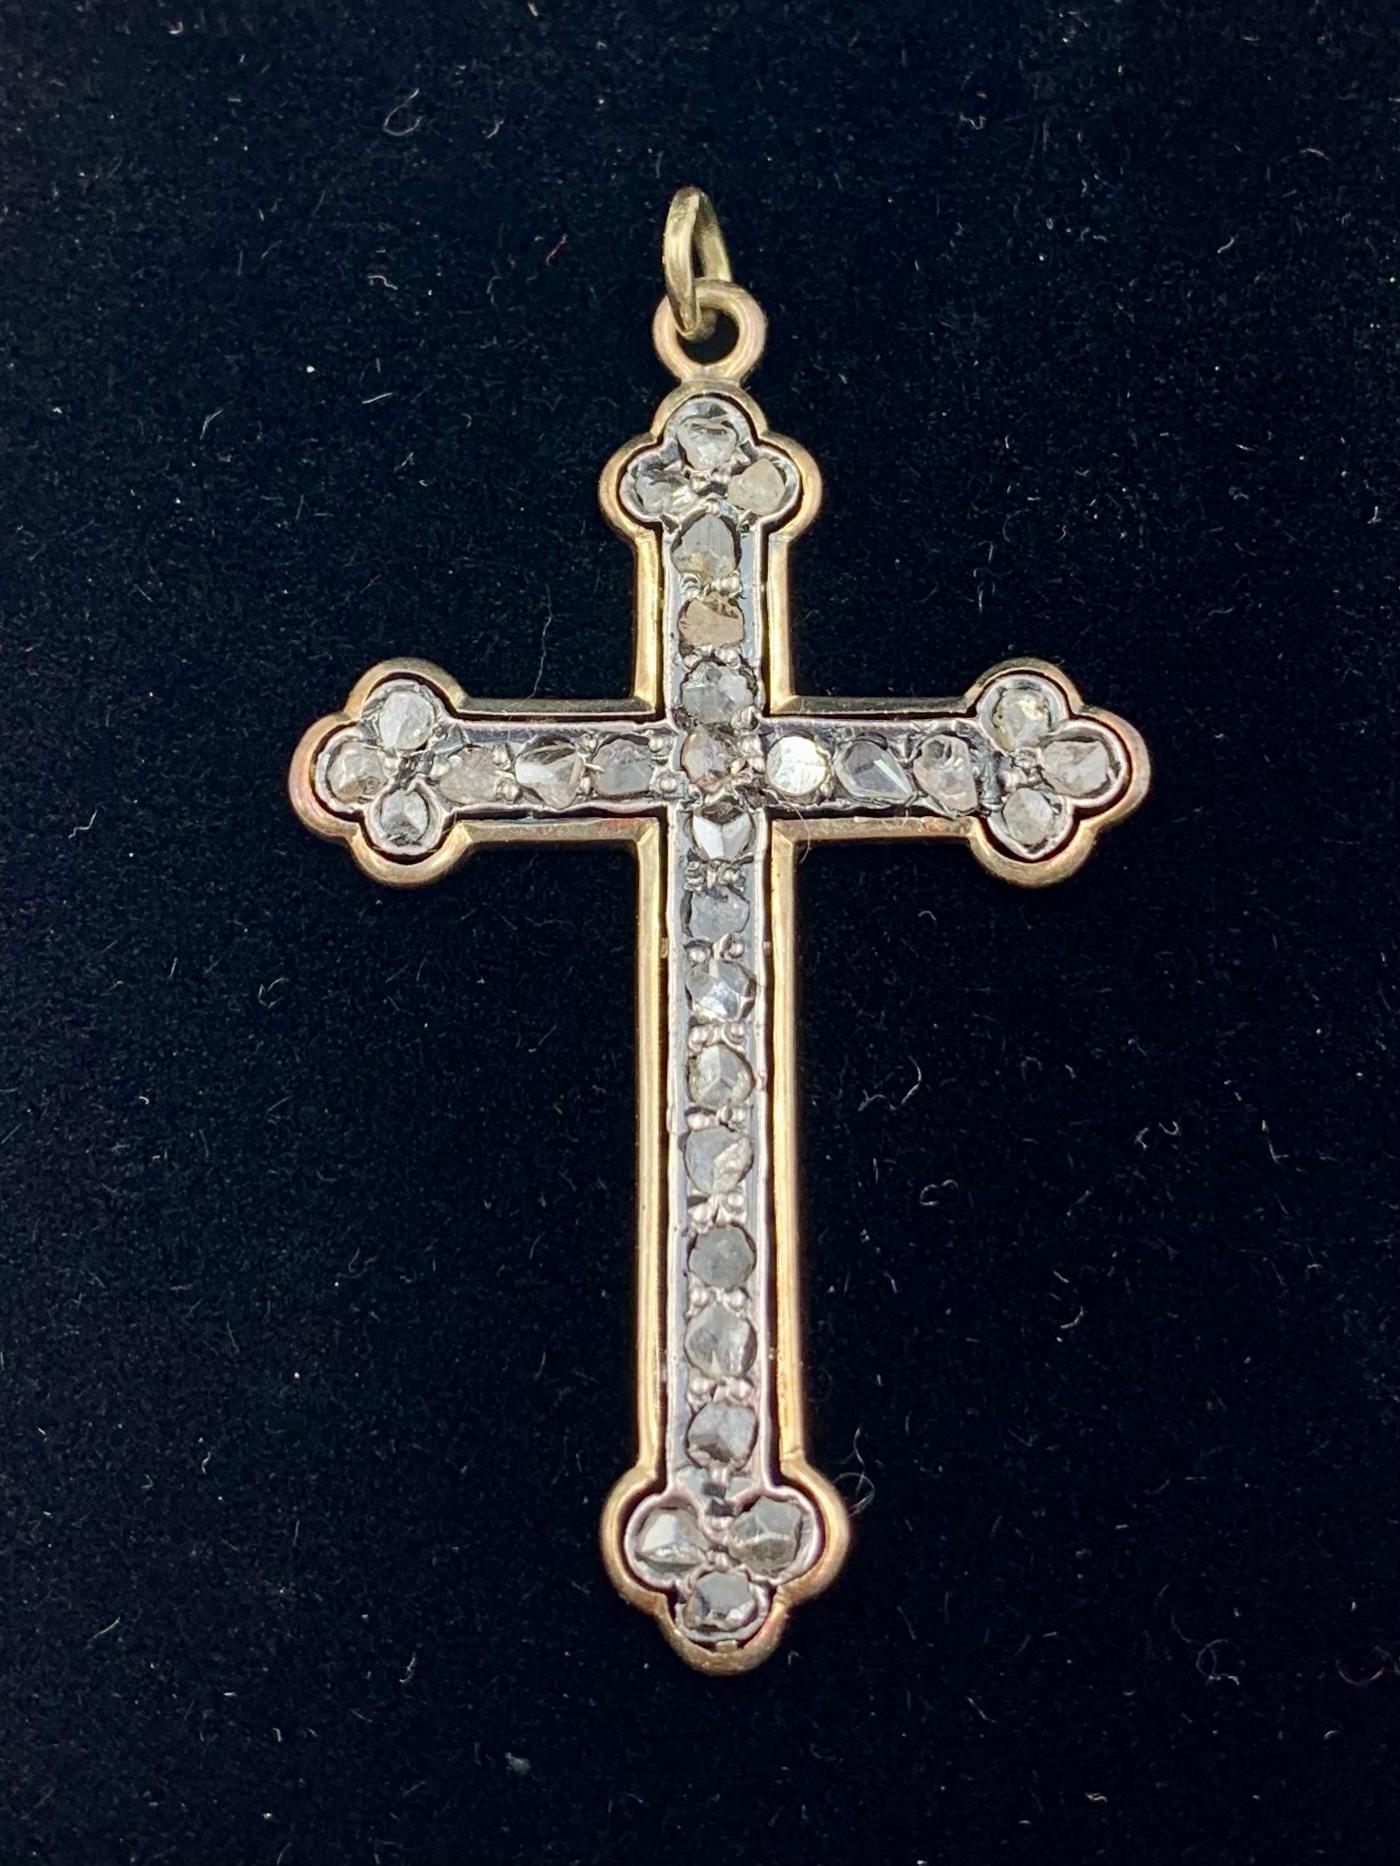 Fine elegant late 18th century Georgian rose cut diamond 14K rose gold trilobed cross. 
Hand cut, natural diamonds of irregular shapes, approximately 2.2 TCW 
The Trilobed cross, sometimes called the Budded Cross with the trilobed terminals symbolic